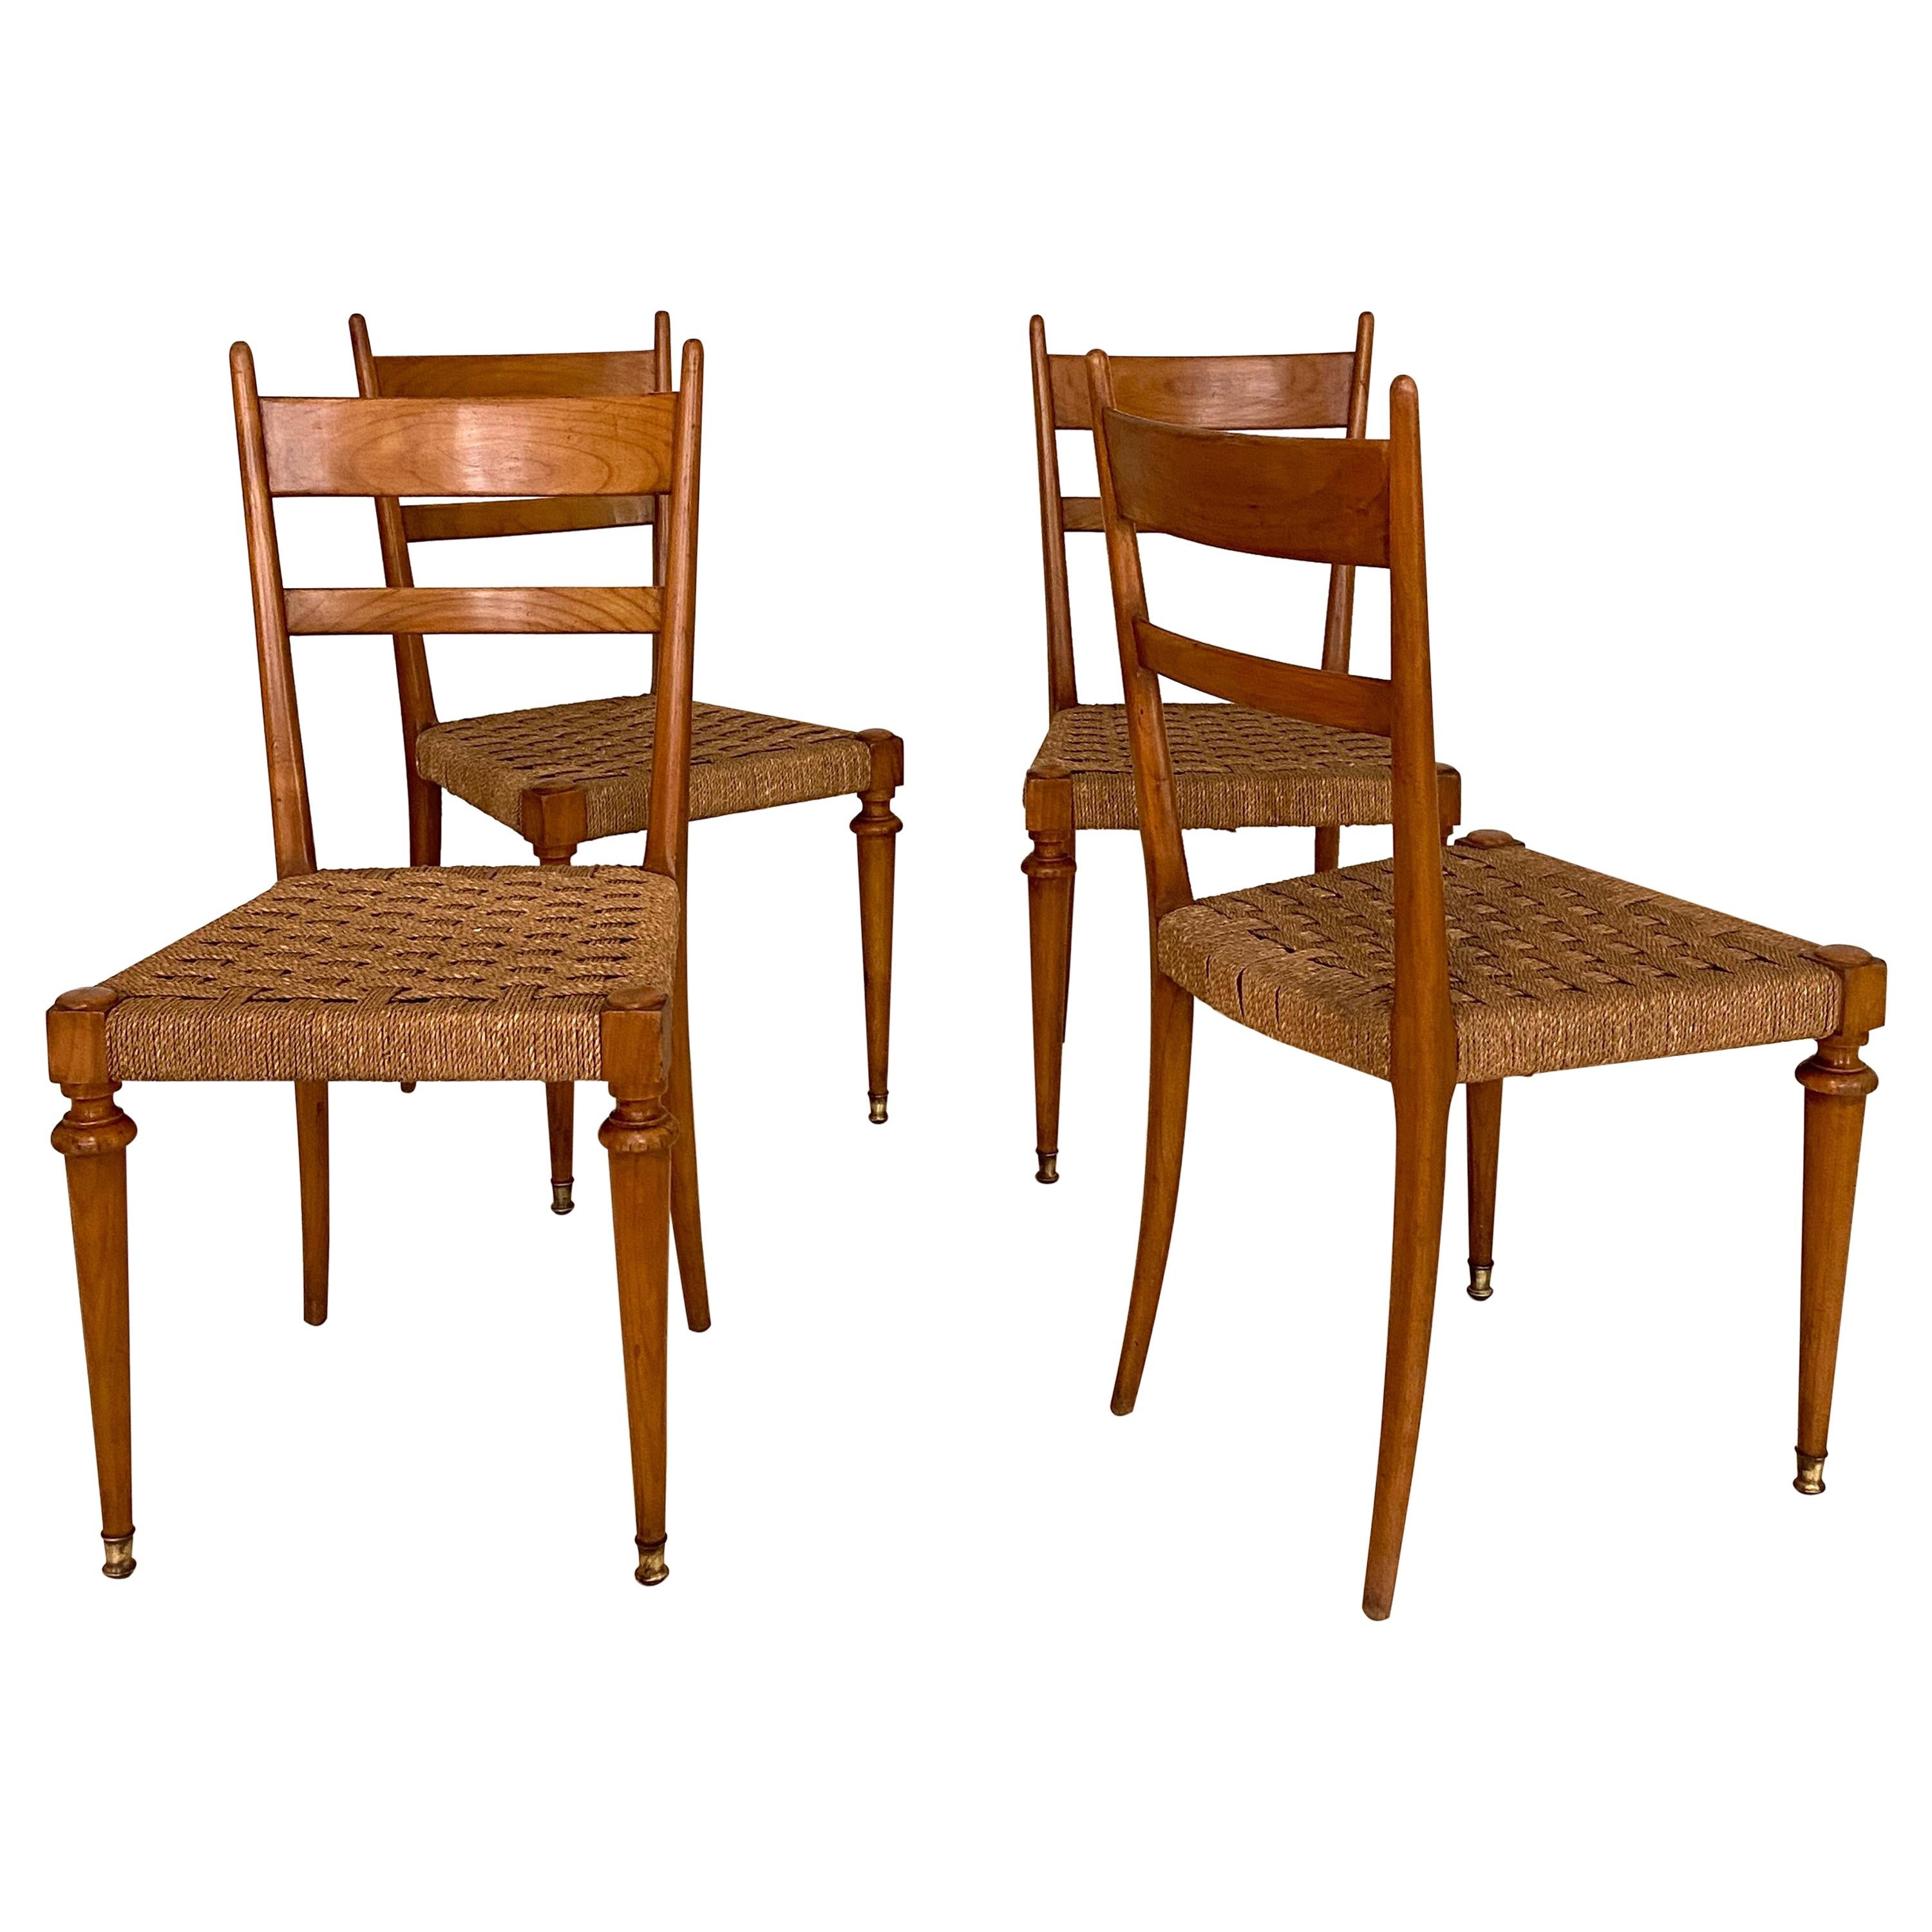 Set of Four Italian Mid-Century Dining Chairs in Cherry and Rope by Pecorini